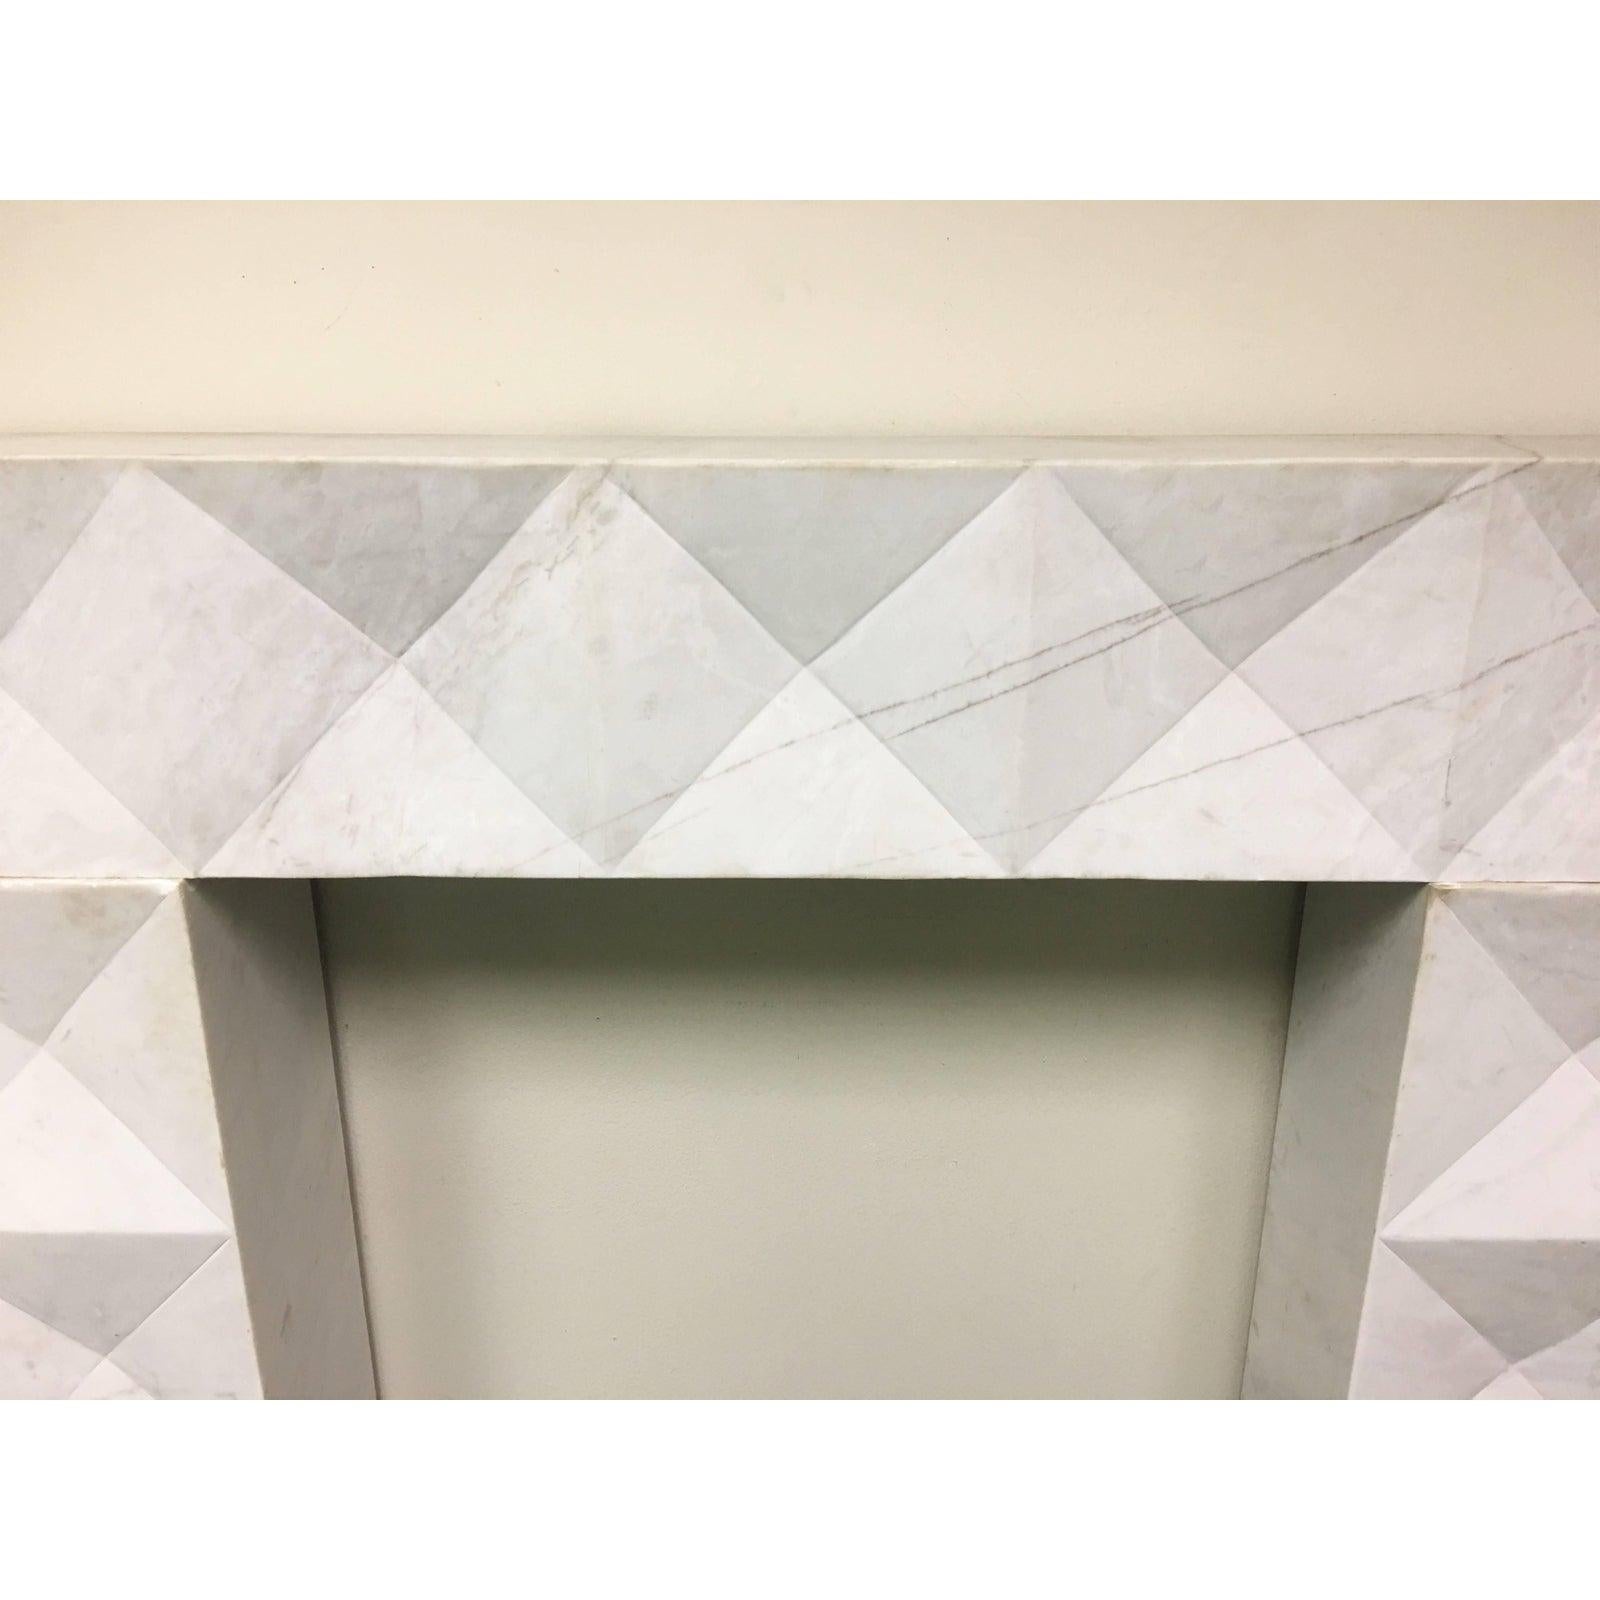 1960s Brutalist Style Mantel in Carrara Marble in Style of De Coene Frères In Good Condition For Sale In Dallas, TX